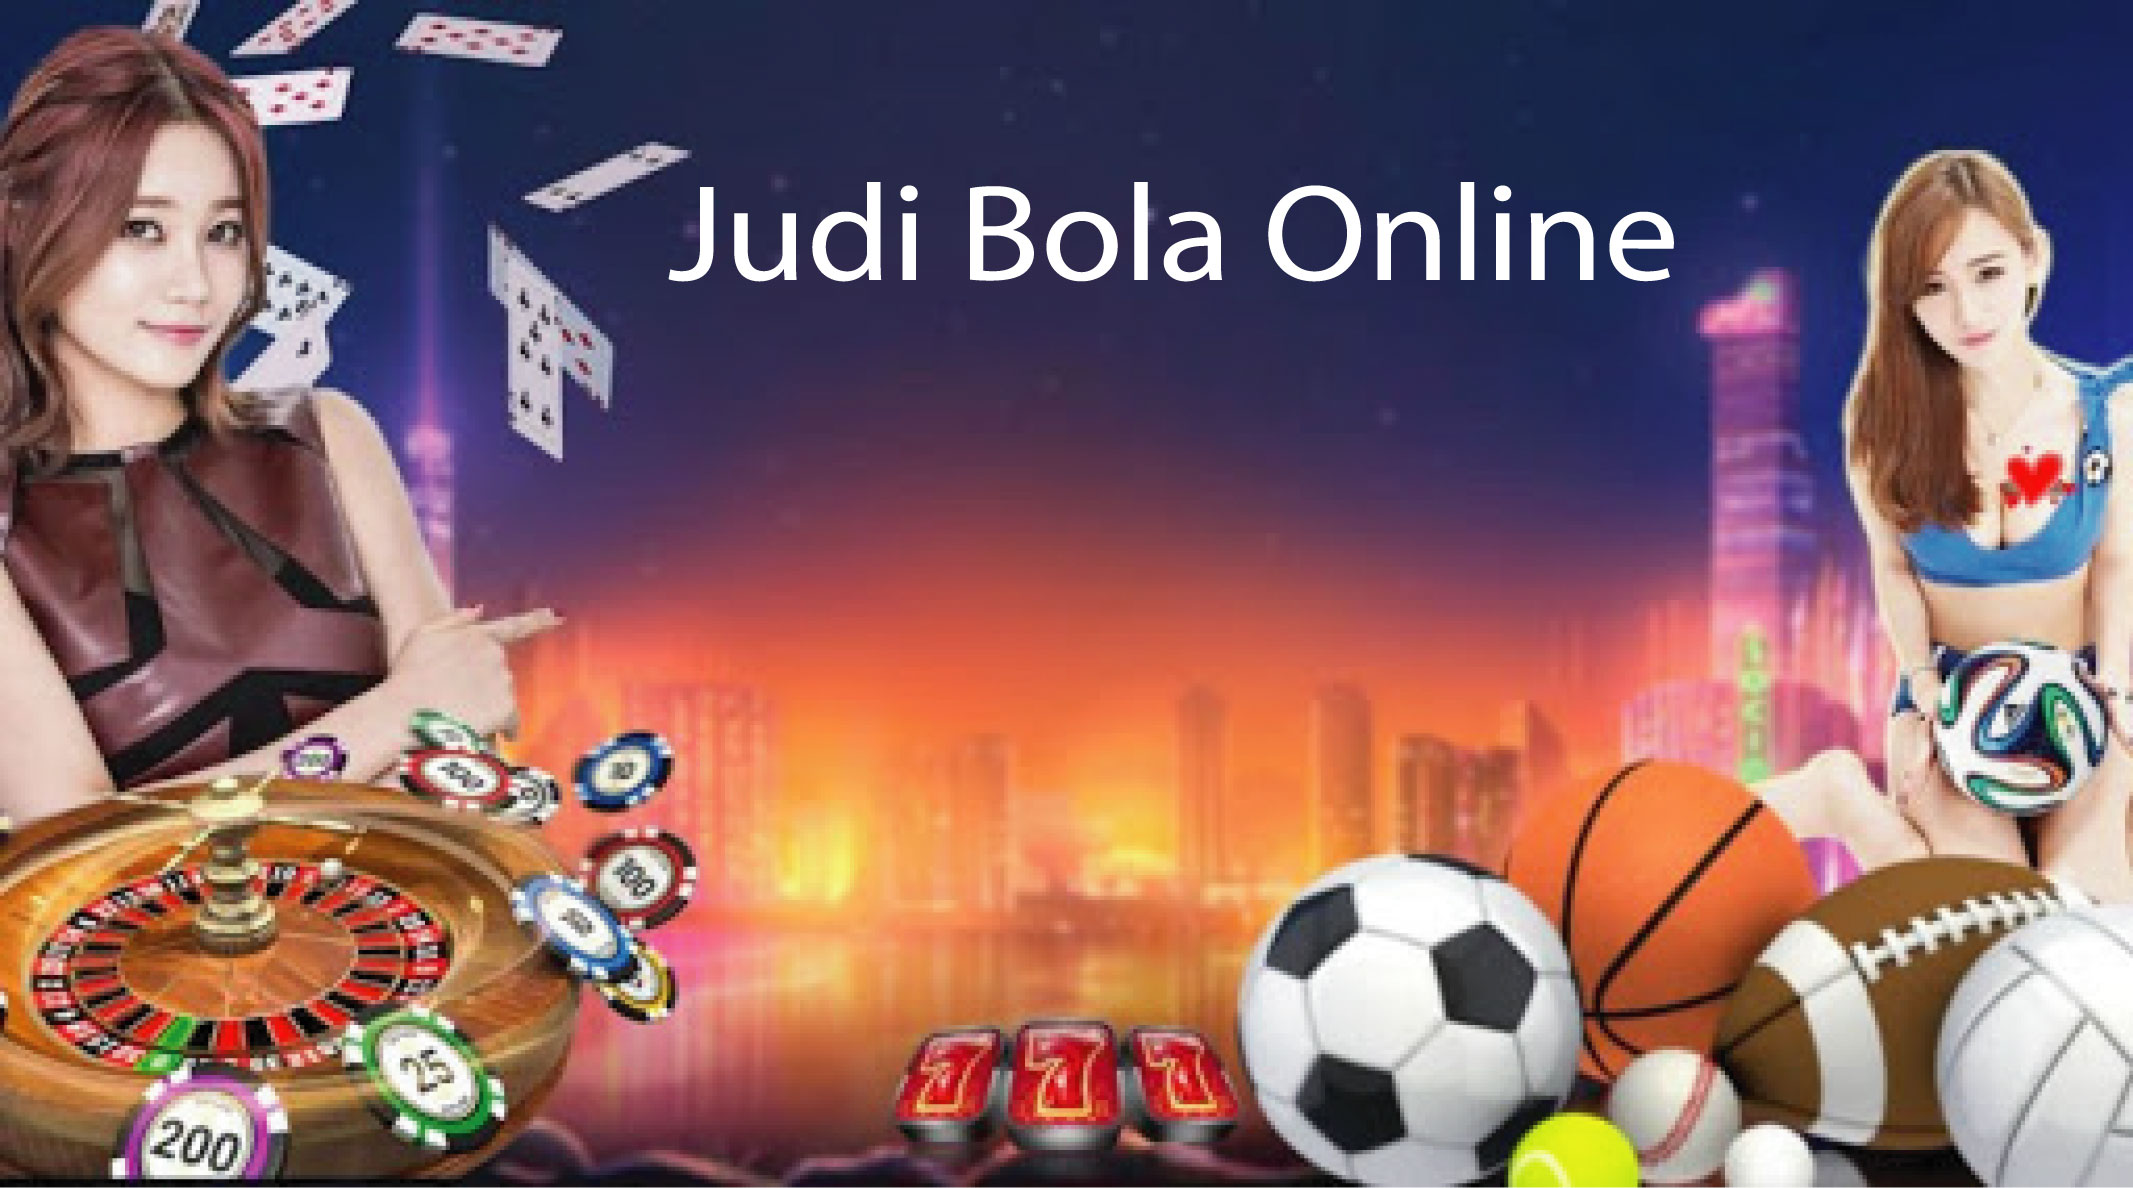 Learn the important benefits of online gambling sites